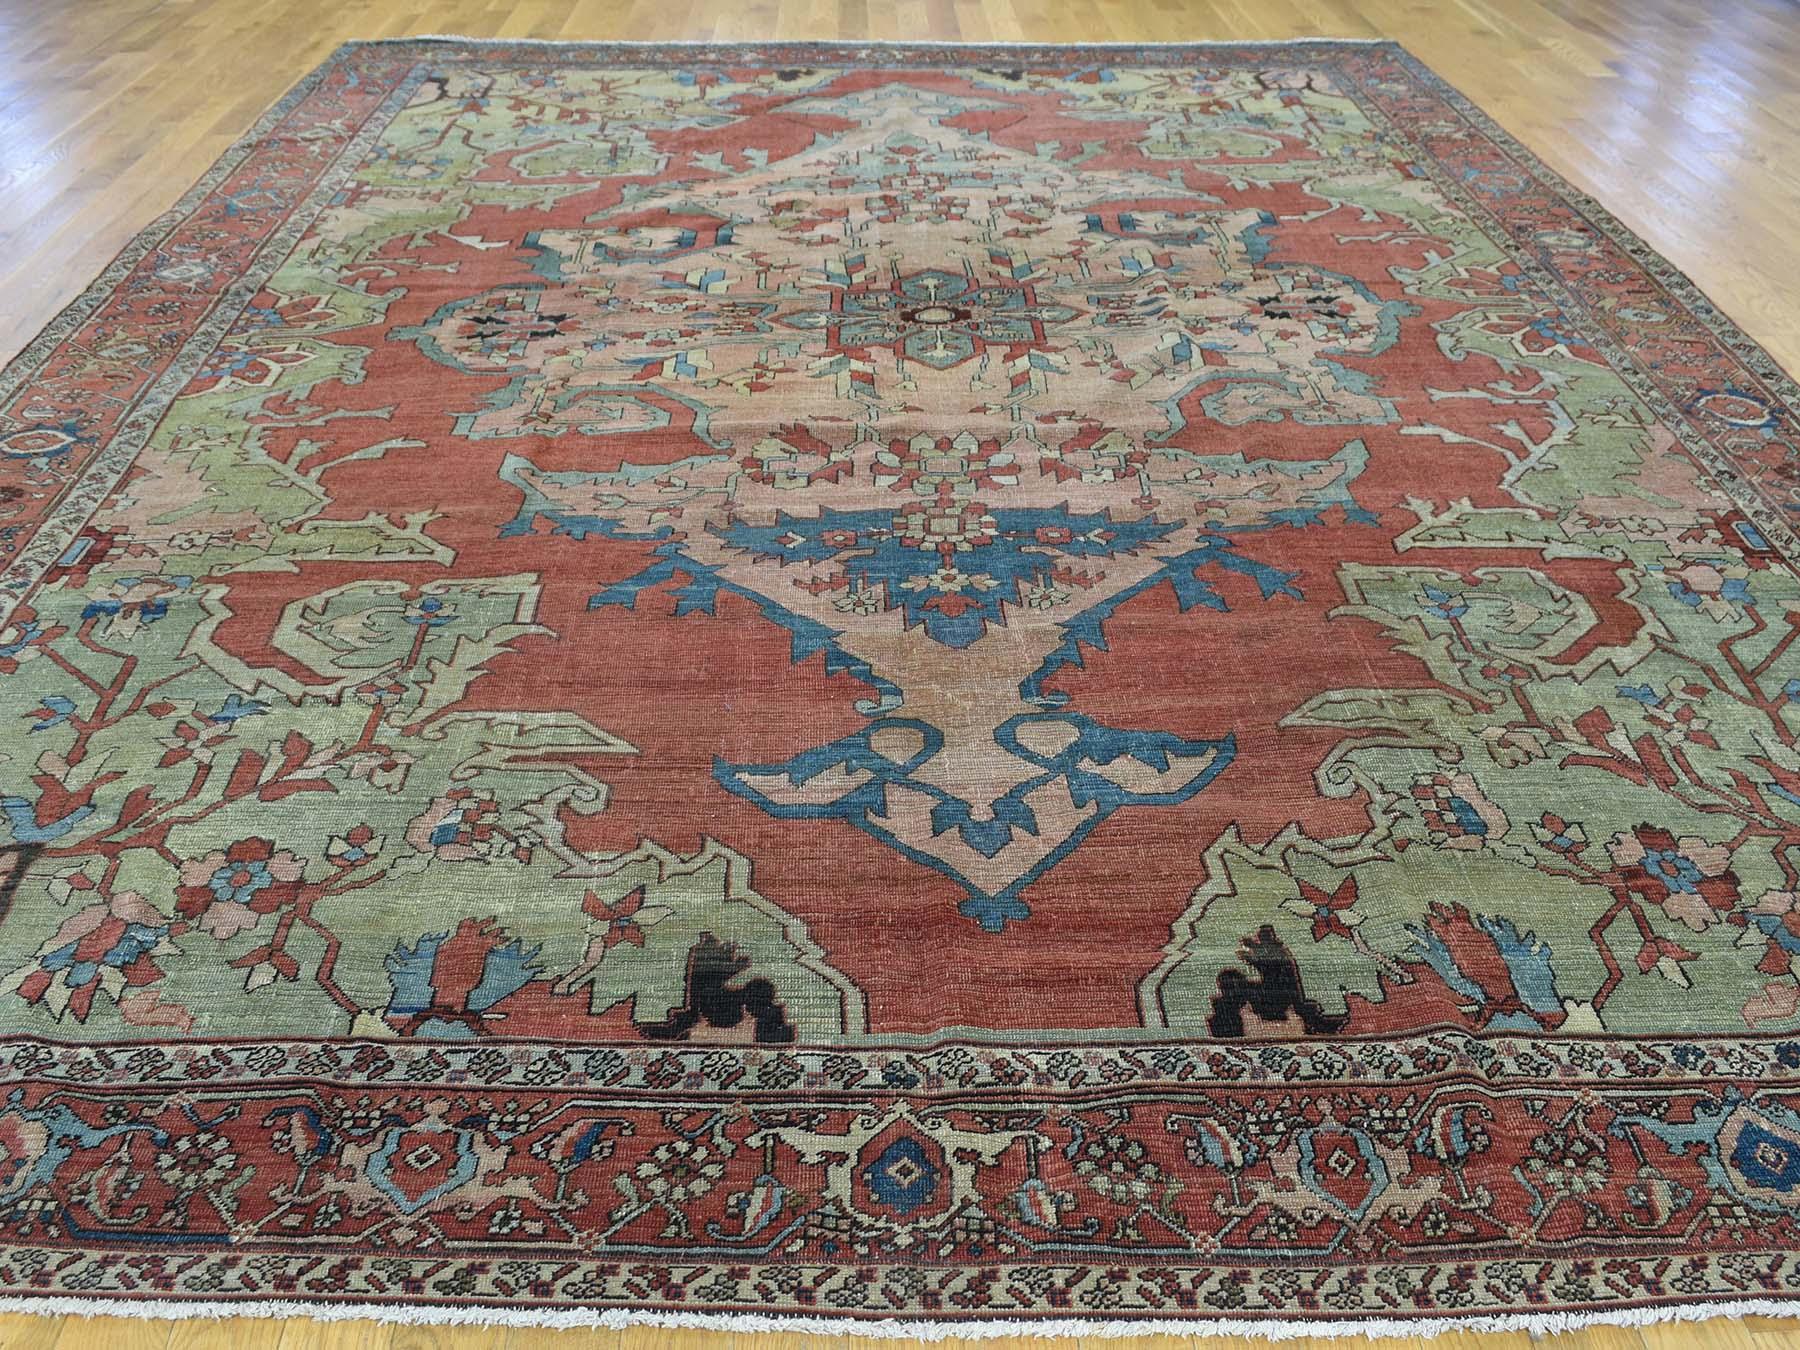 Hand-Knotted Red/Green 1880 Antique Persian Serapi Rug, Large Medallion